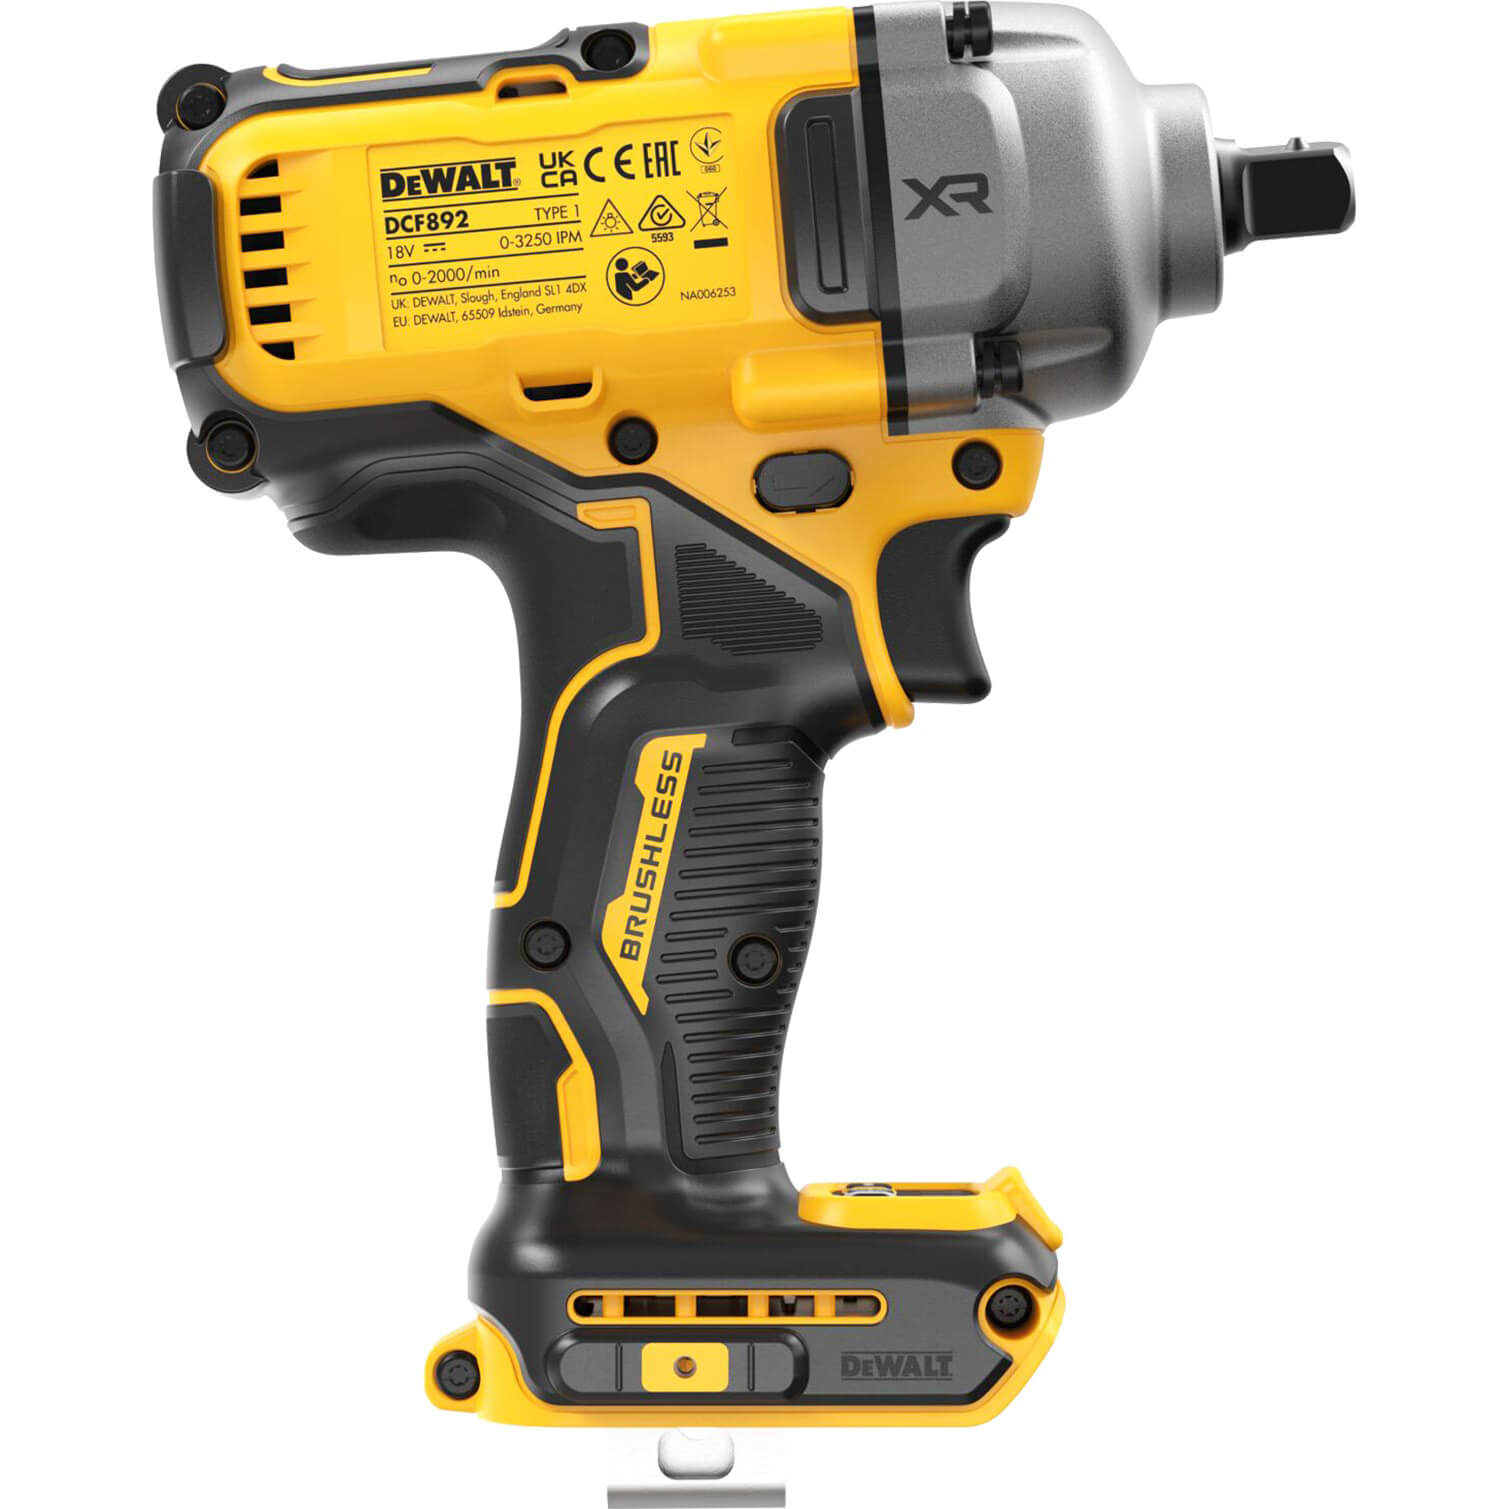 Image of DeWalt DCF892 18v XR Cordless Brushless 1/2" Compact High Torque Wrench No Batteries No Charger No Case